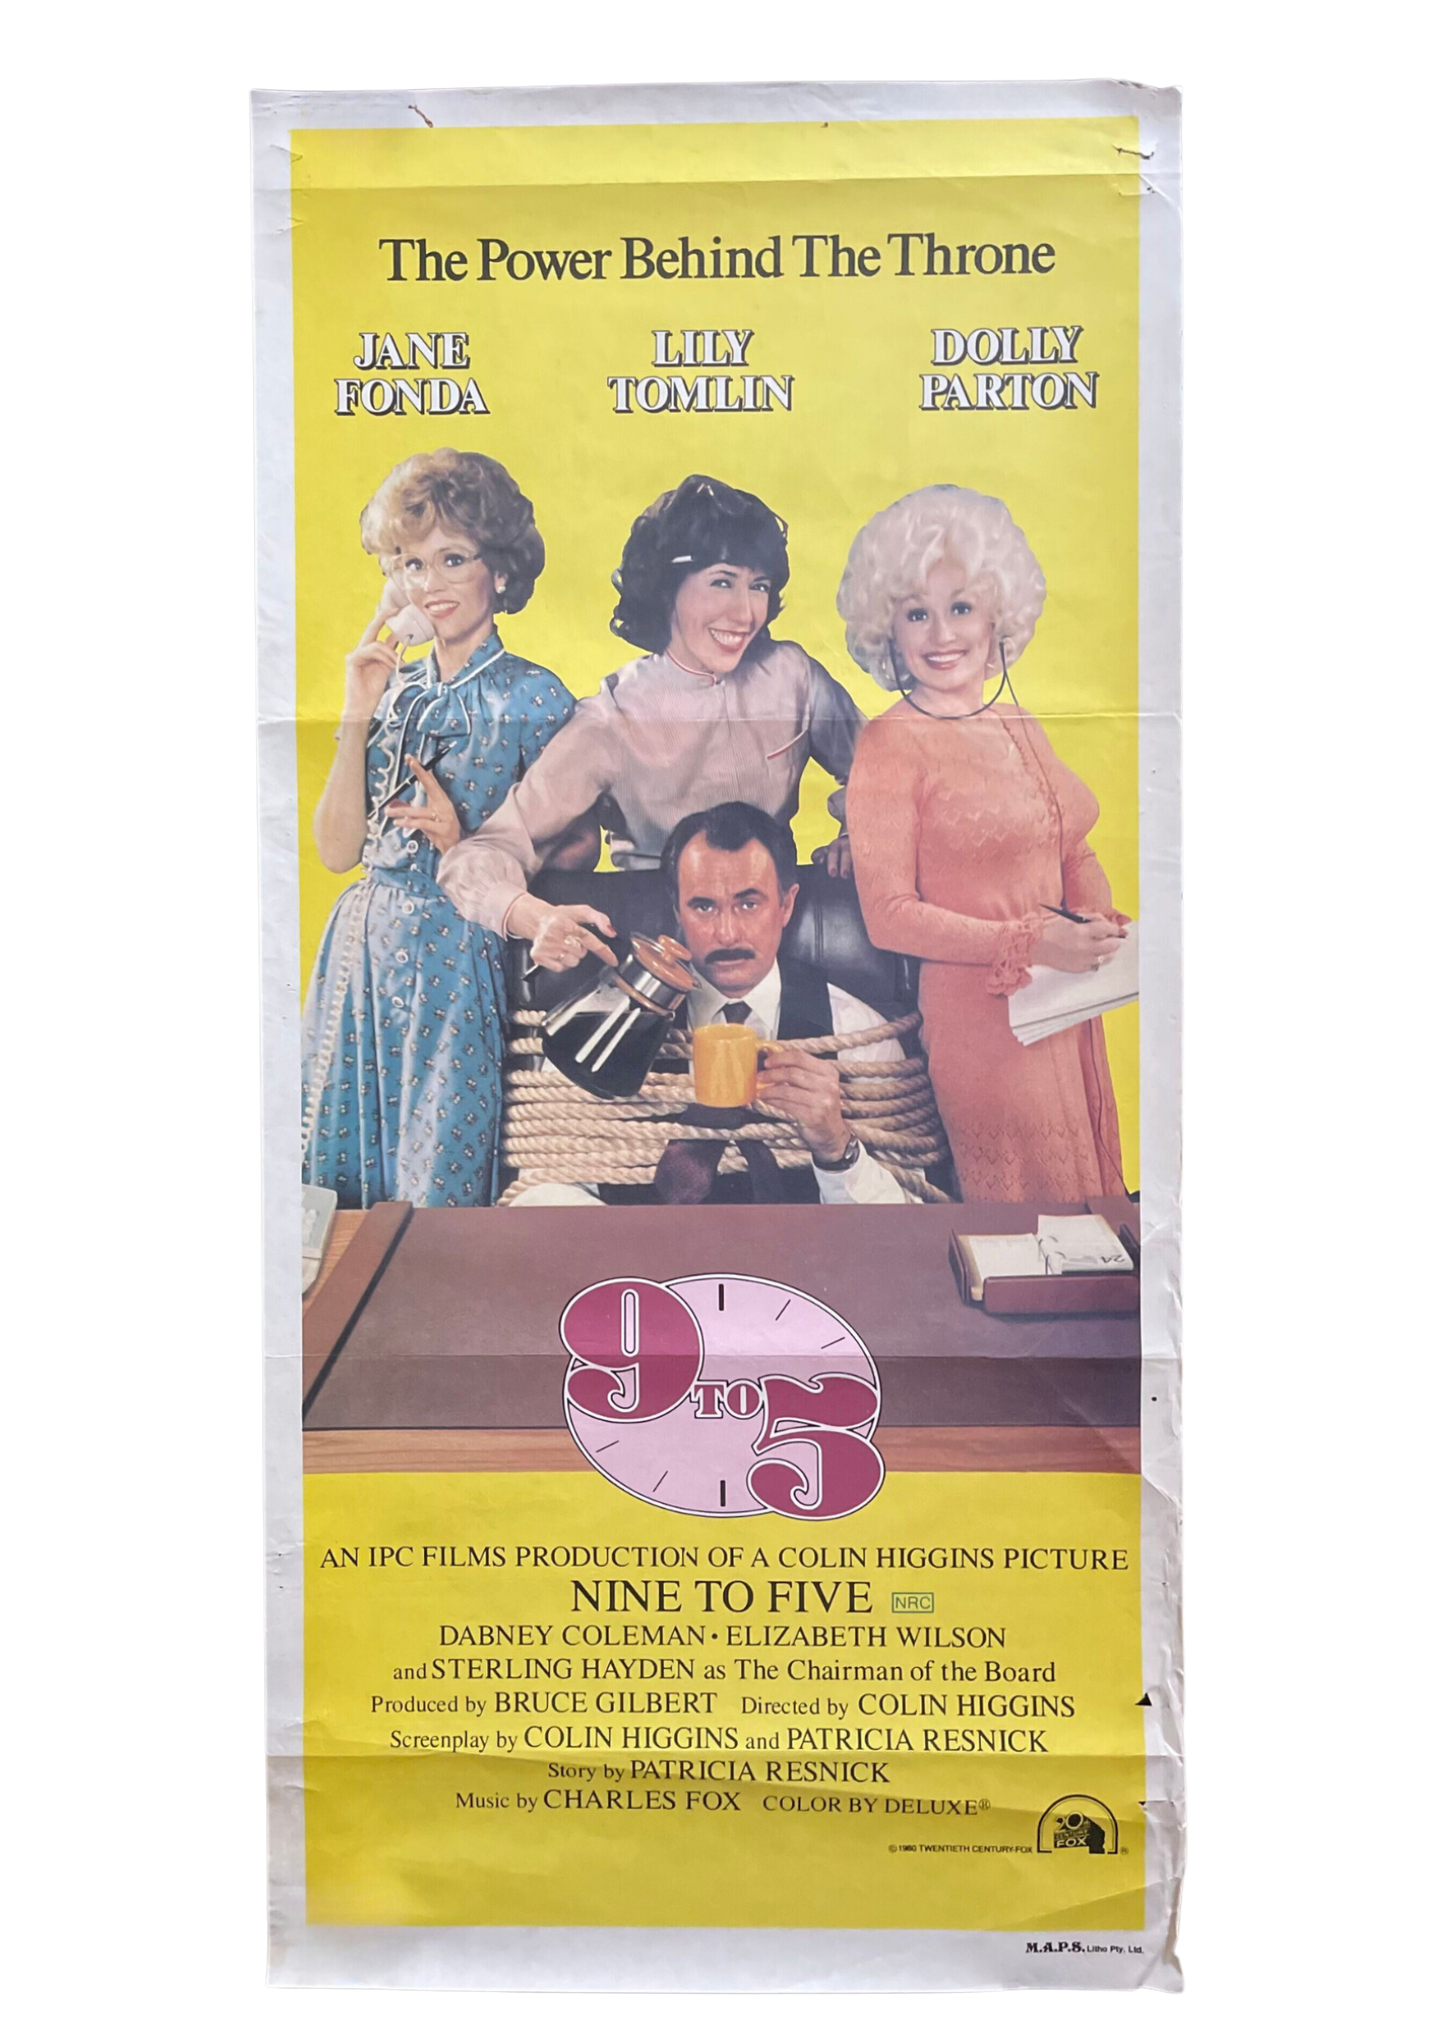 9 to 5 (1980) - Daybill